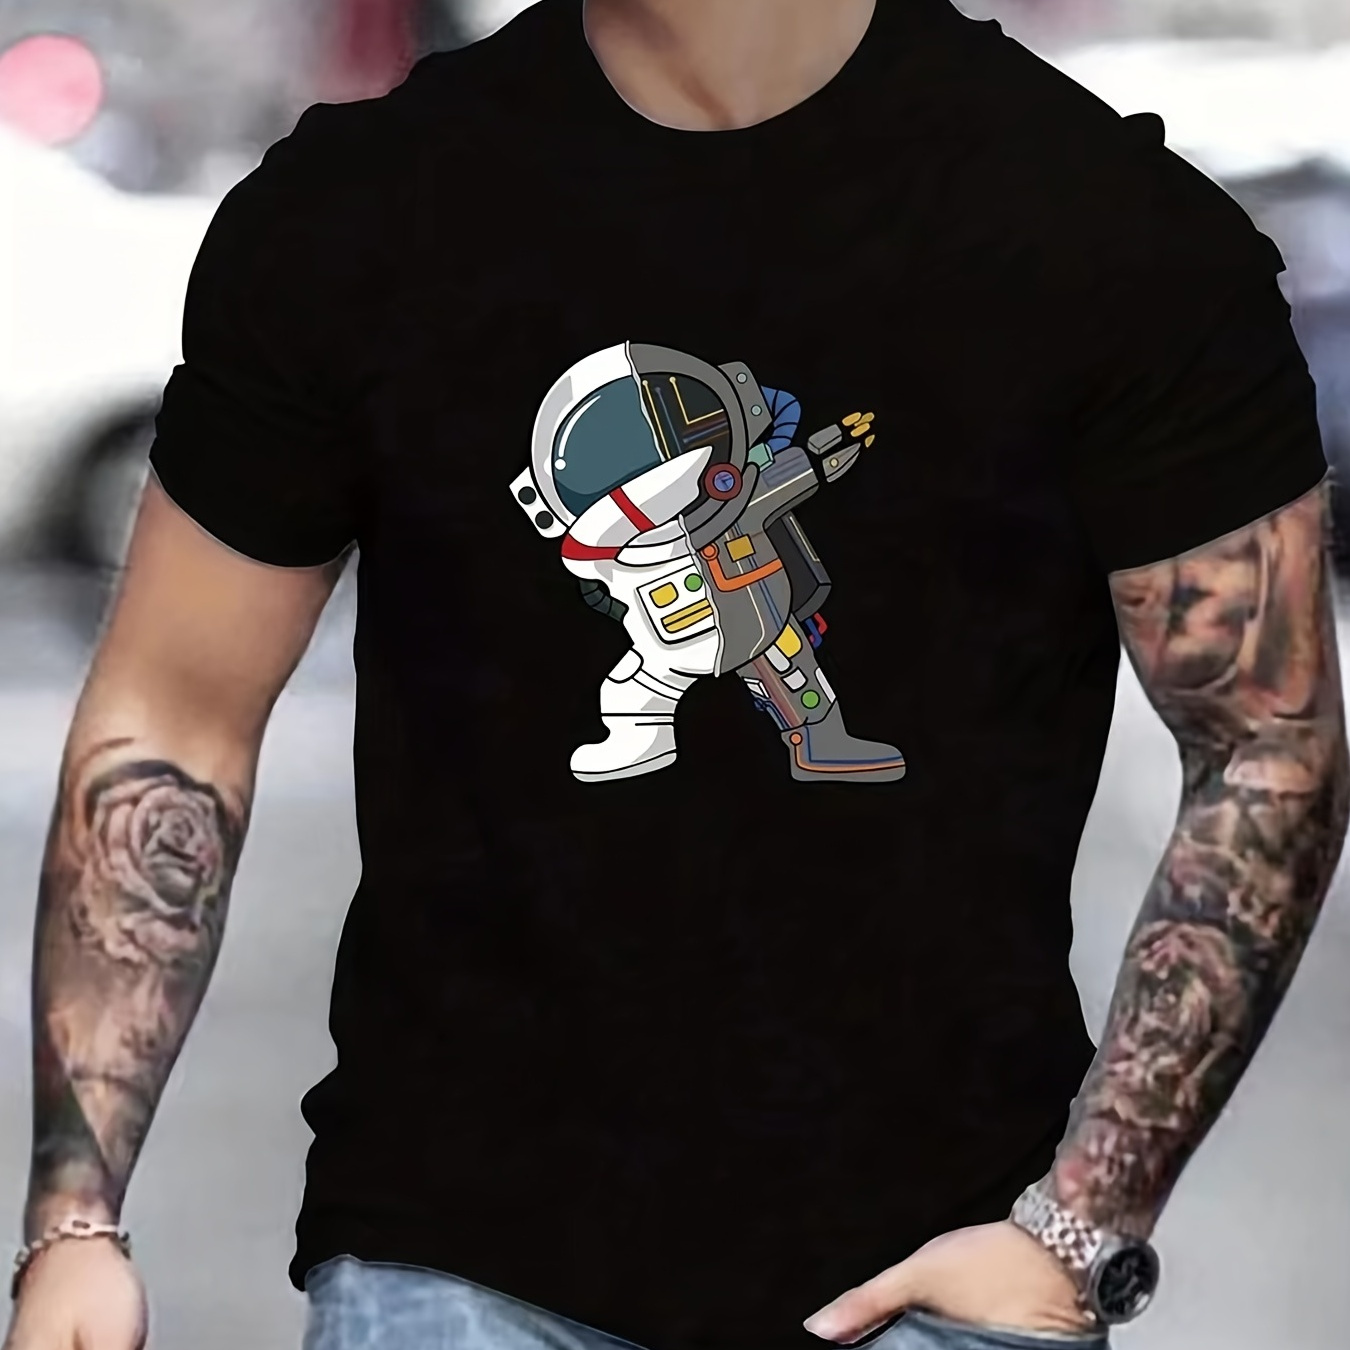 

Astronaut In Victory Pose Print T Shirt, Tees For Men, Casual Short Sleeve Tshirt For Summer Spring Fall, Tops As Gifts